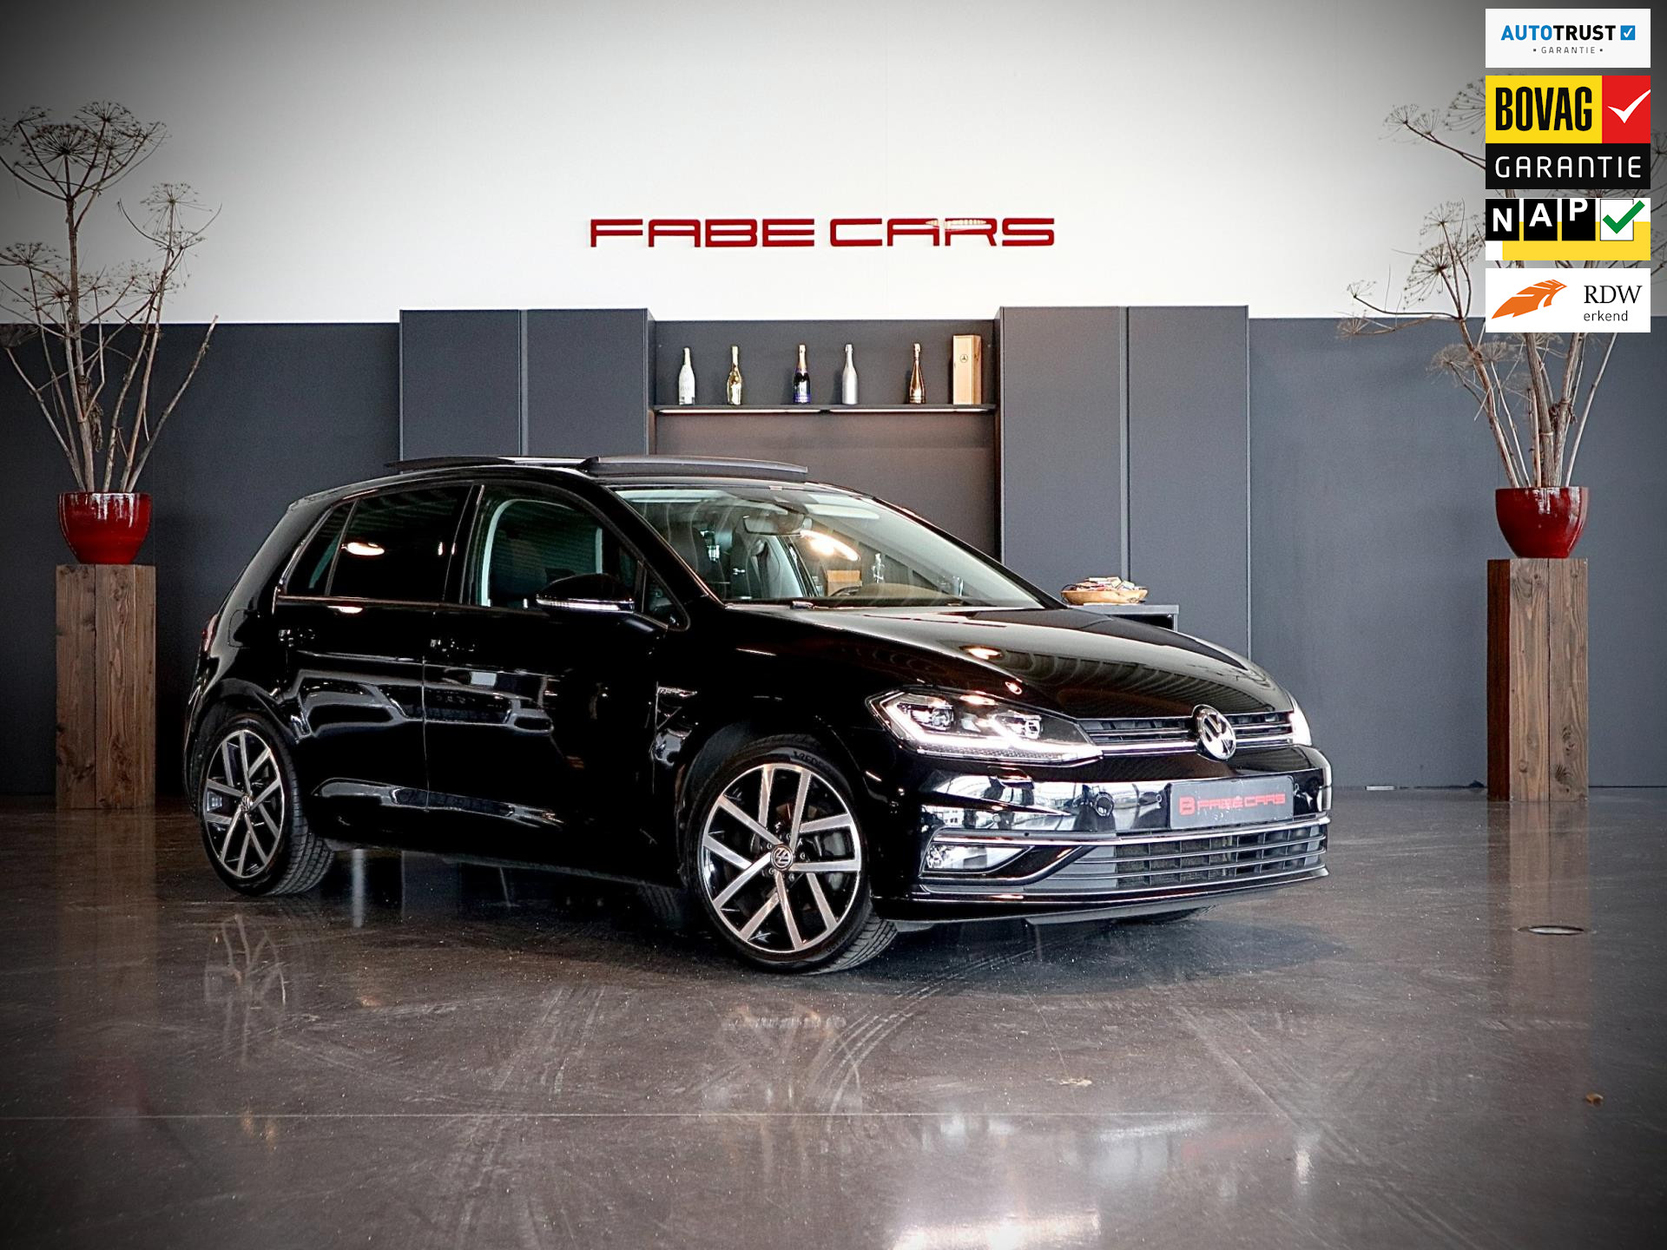 Fabe Cars